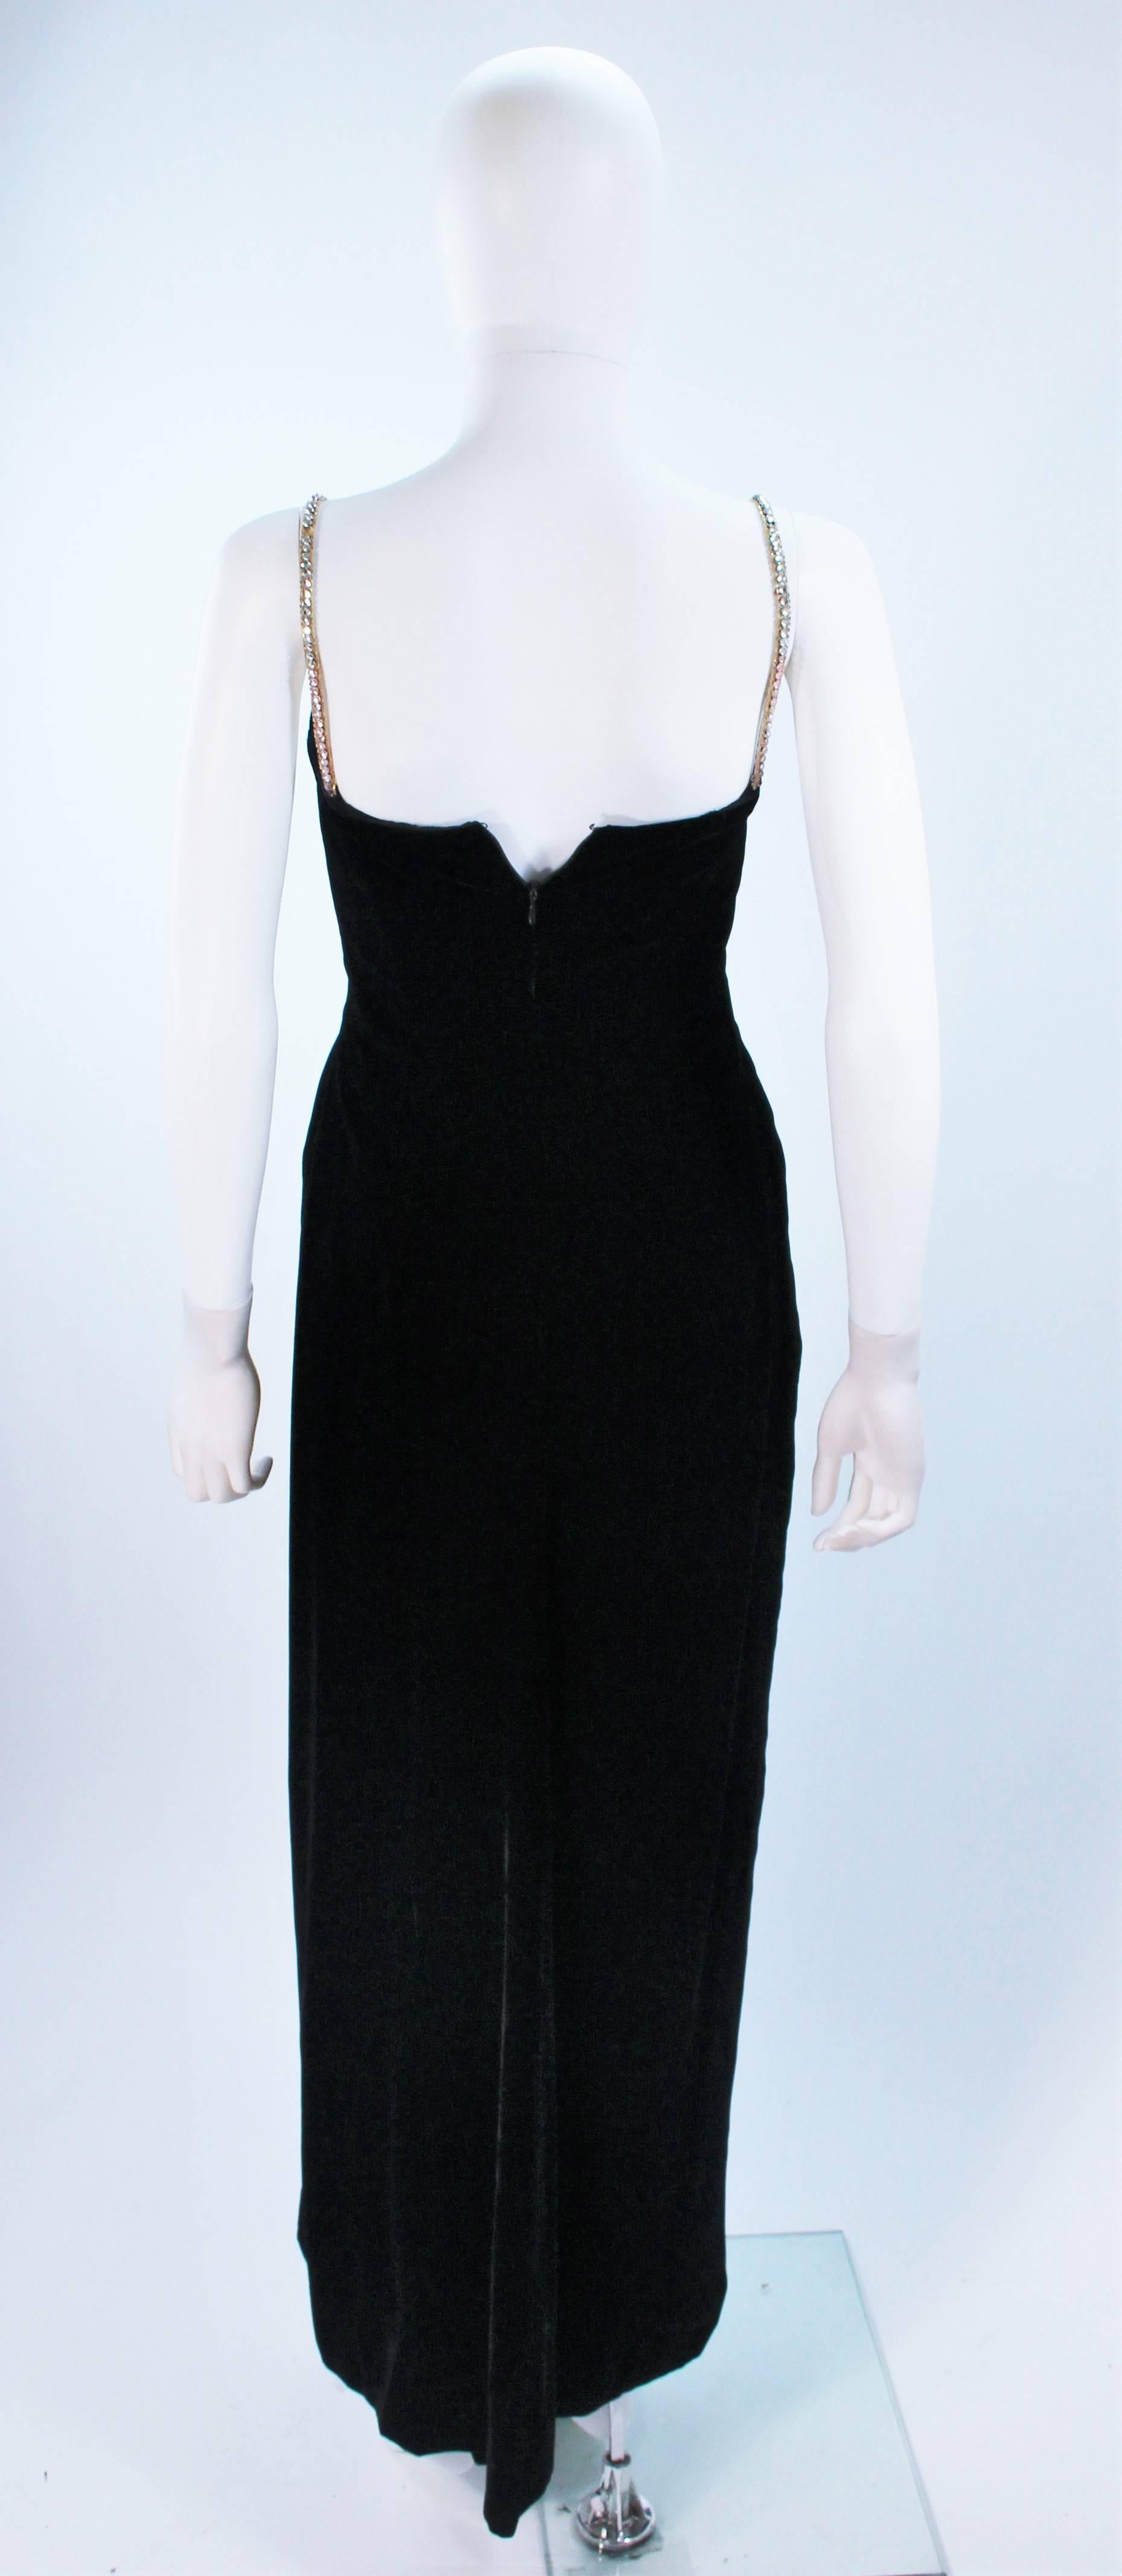 CAROLYN ROEHM Black Velvet Gown with Bows & Embellished Neckline Size 6-8 5